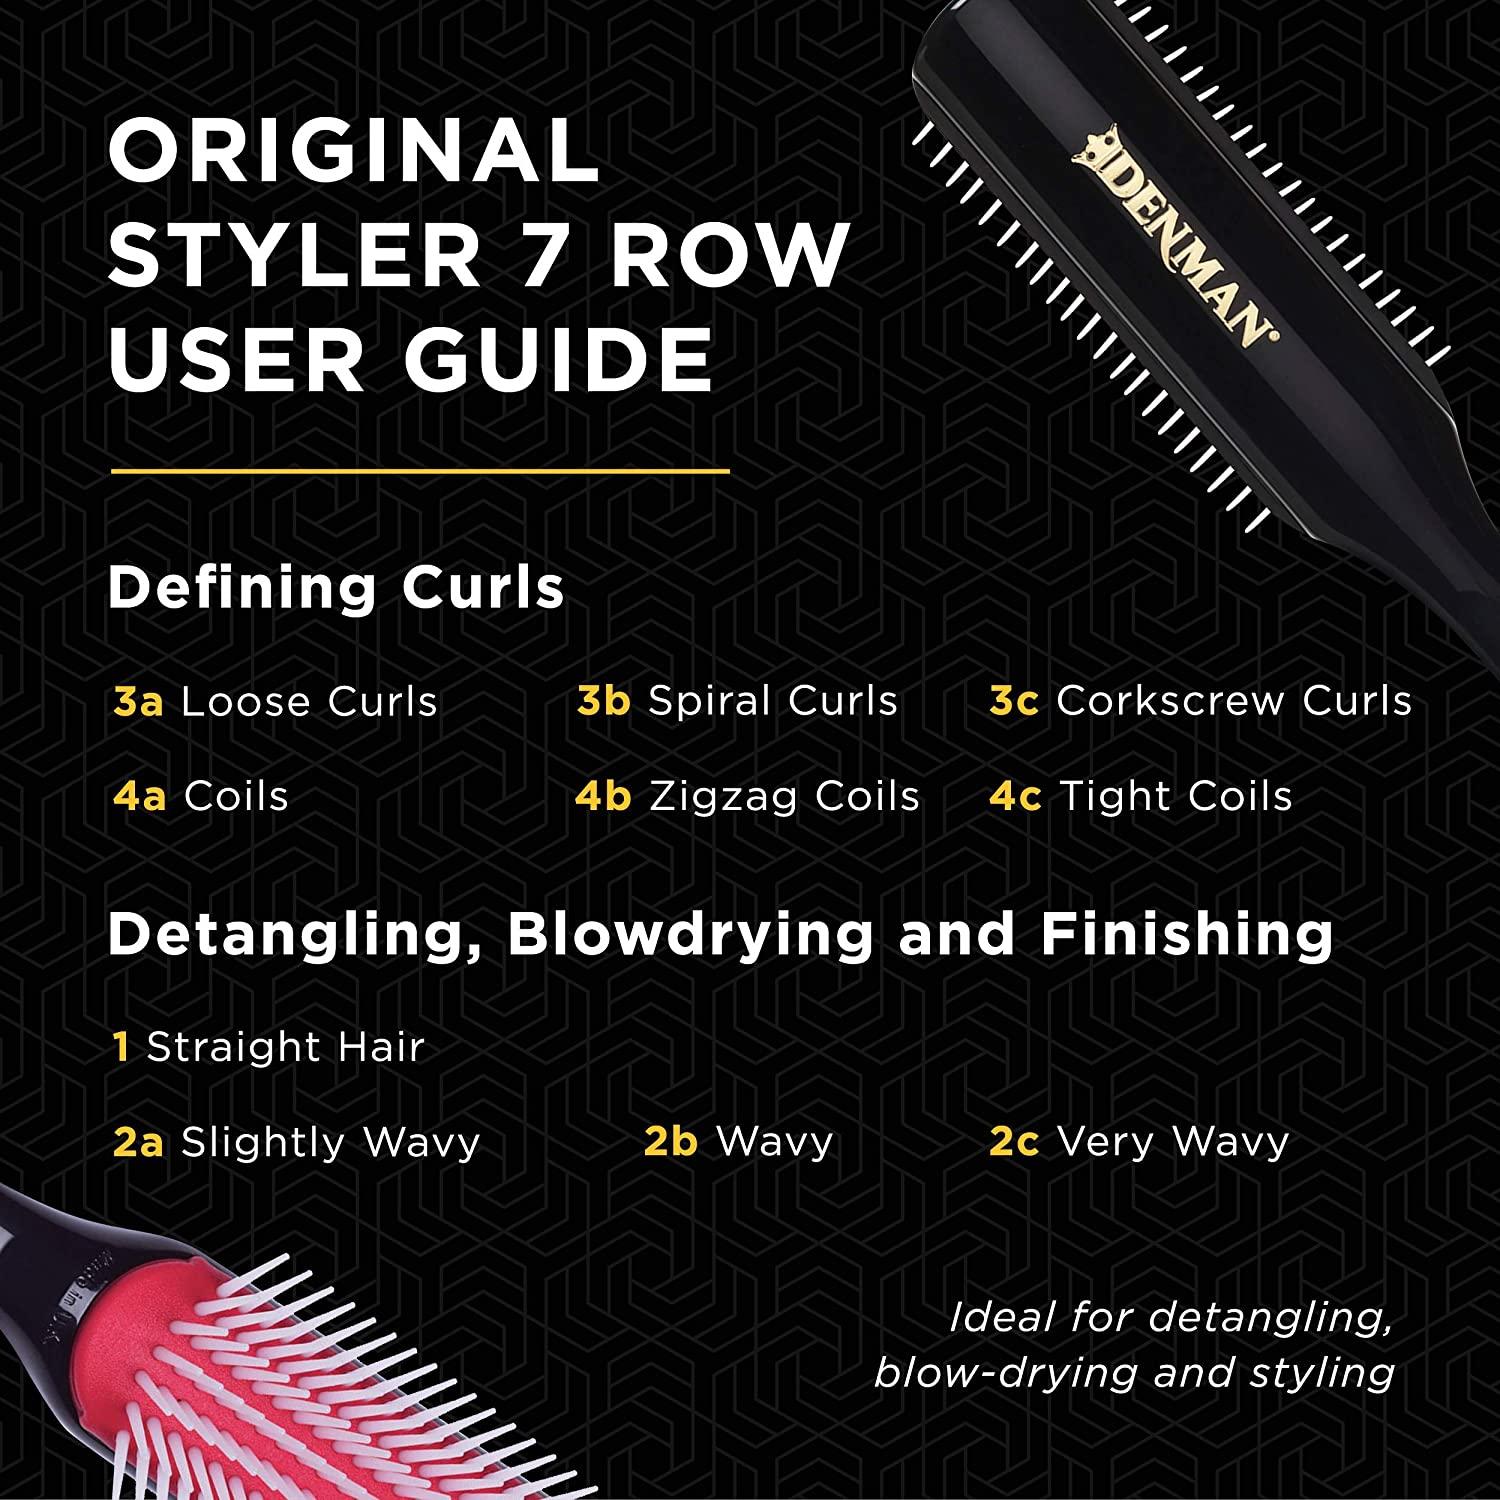 Denman Hair Brush for Curly Hair D3 (Black) 7 Row Classic Styling Brush for  Detangling, Separating, Shaping and Defining Curls Black 7 Row